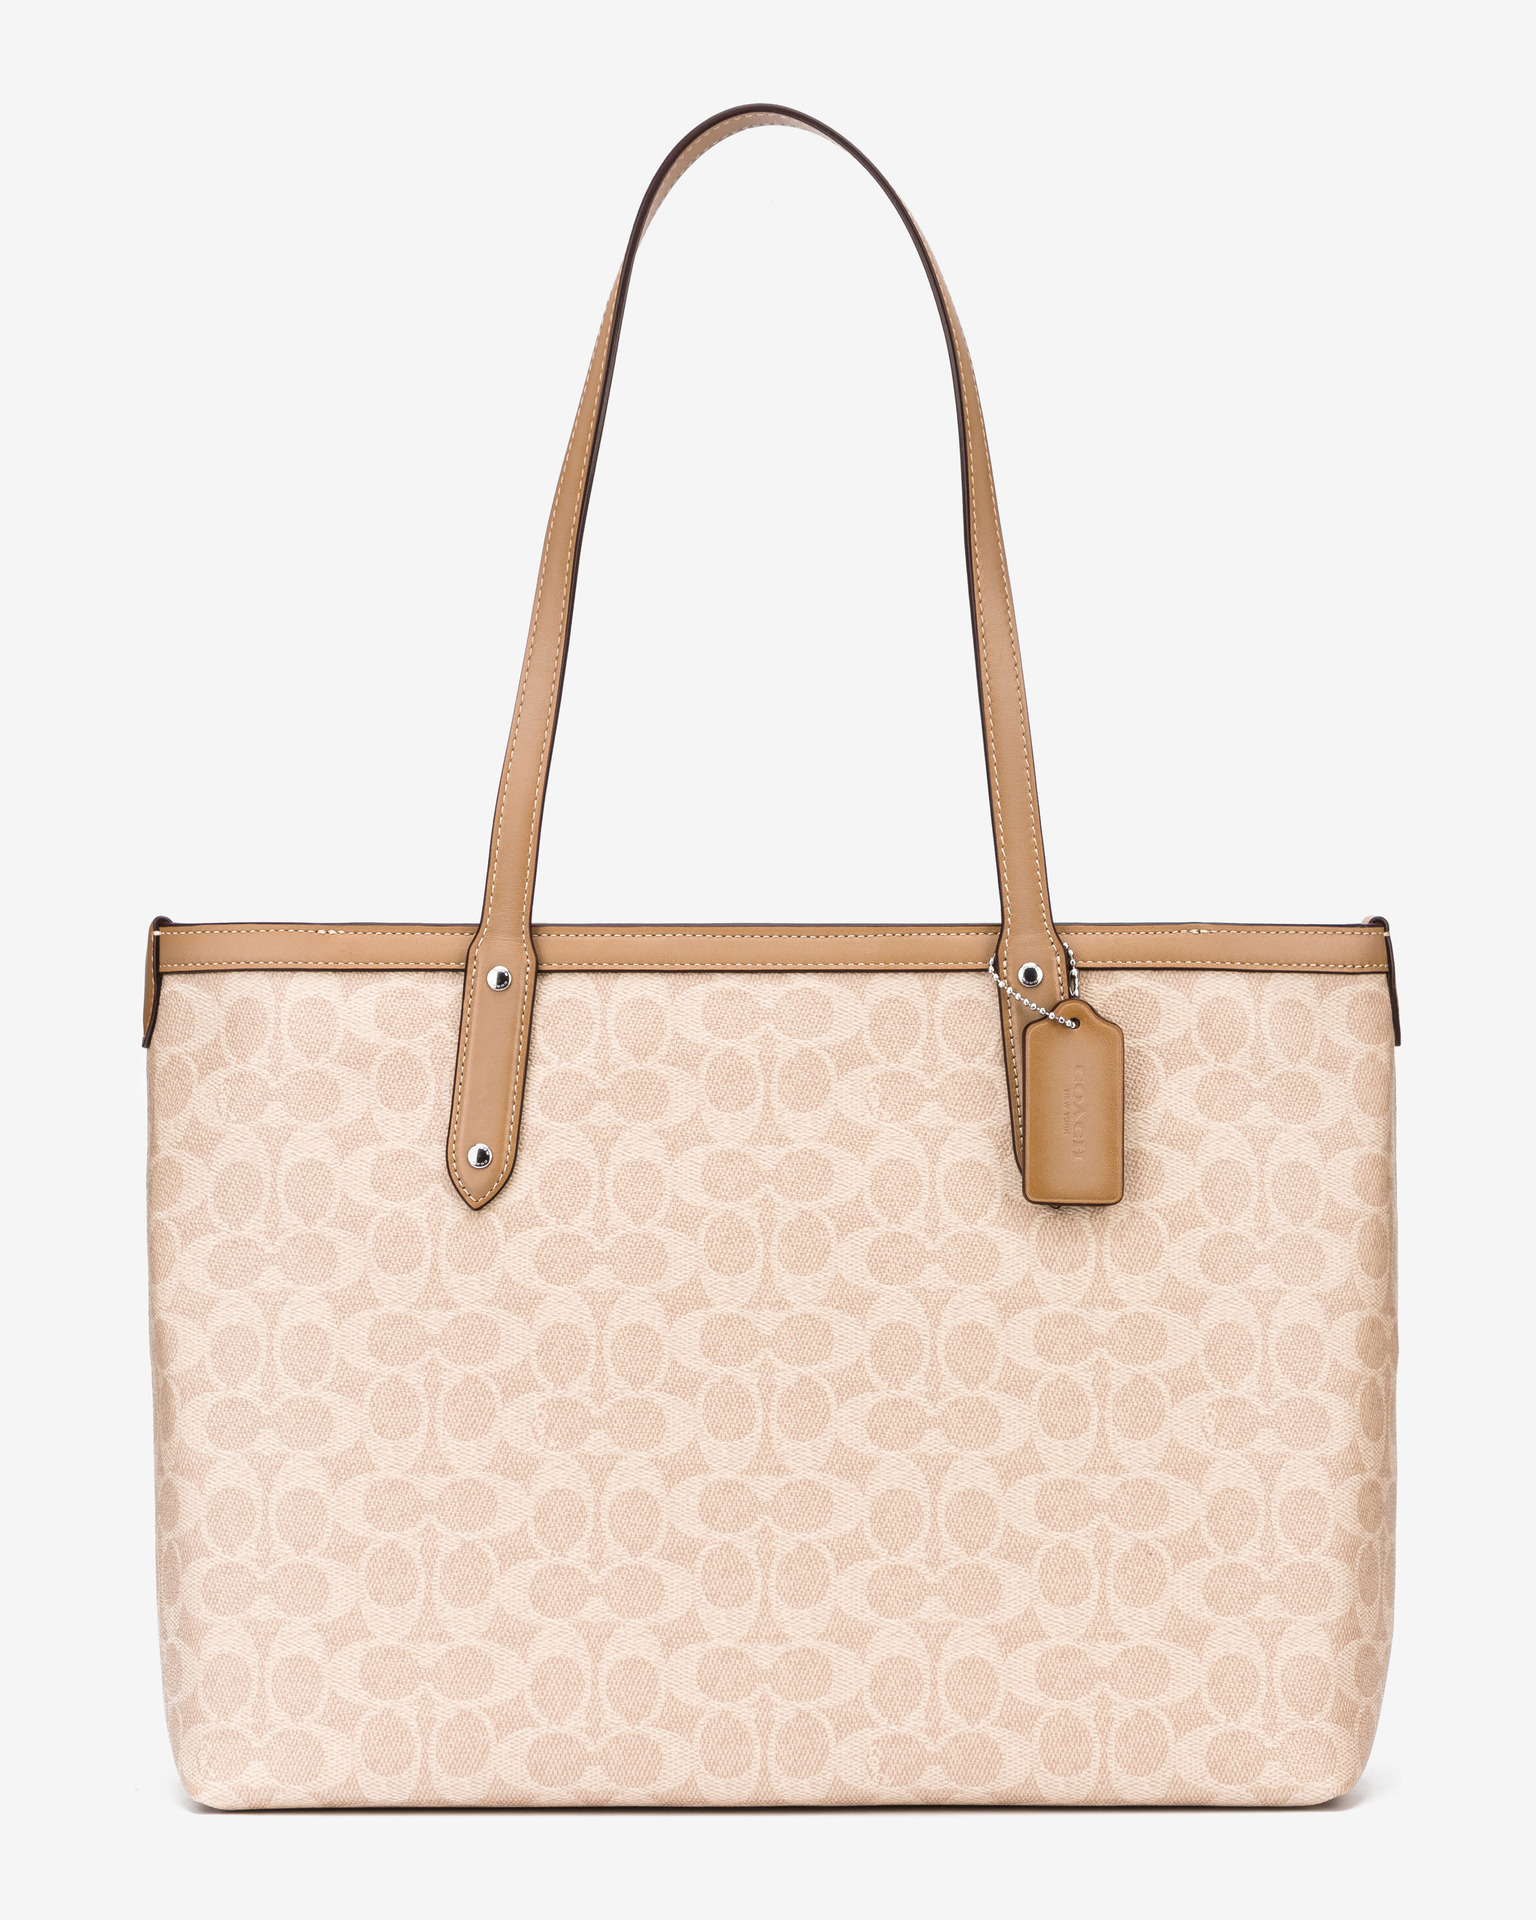 COACH 'central' Tote Bag Beige in Natural